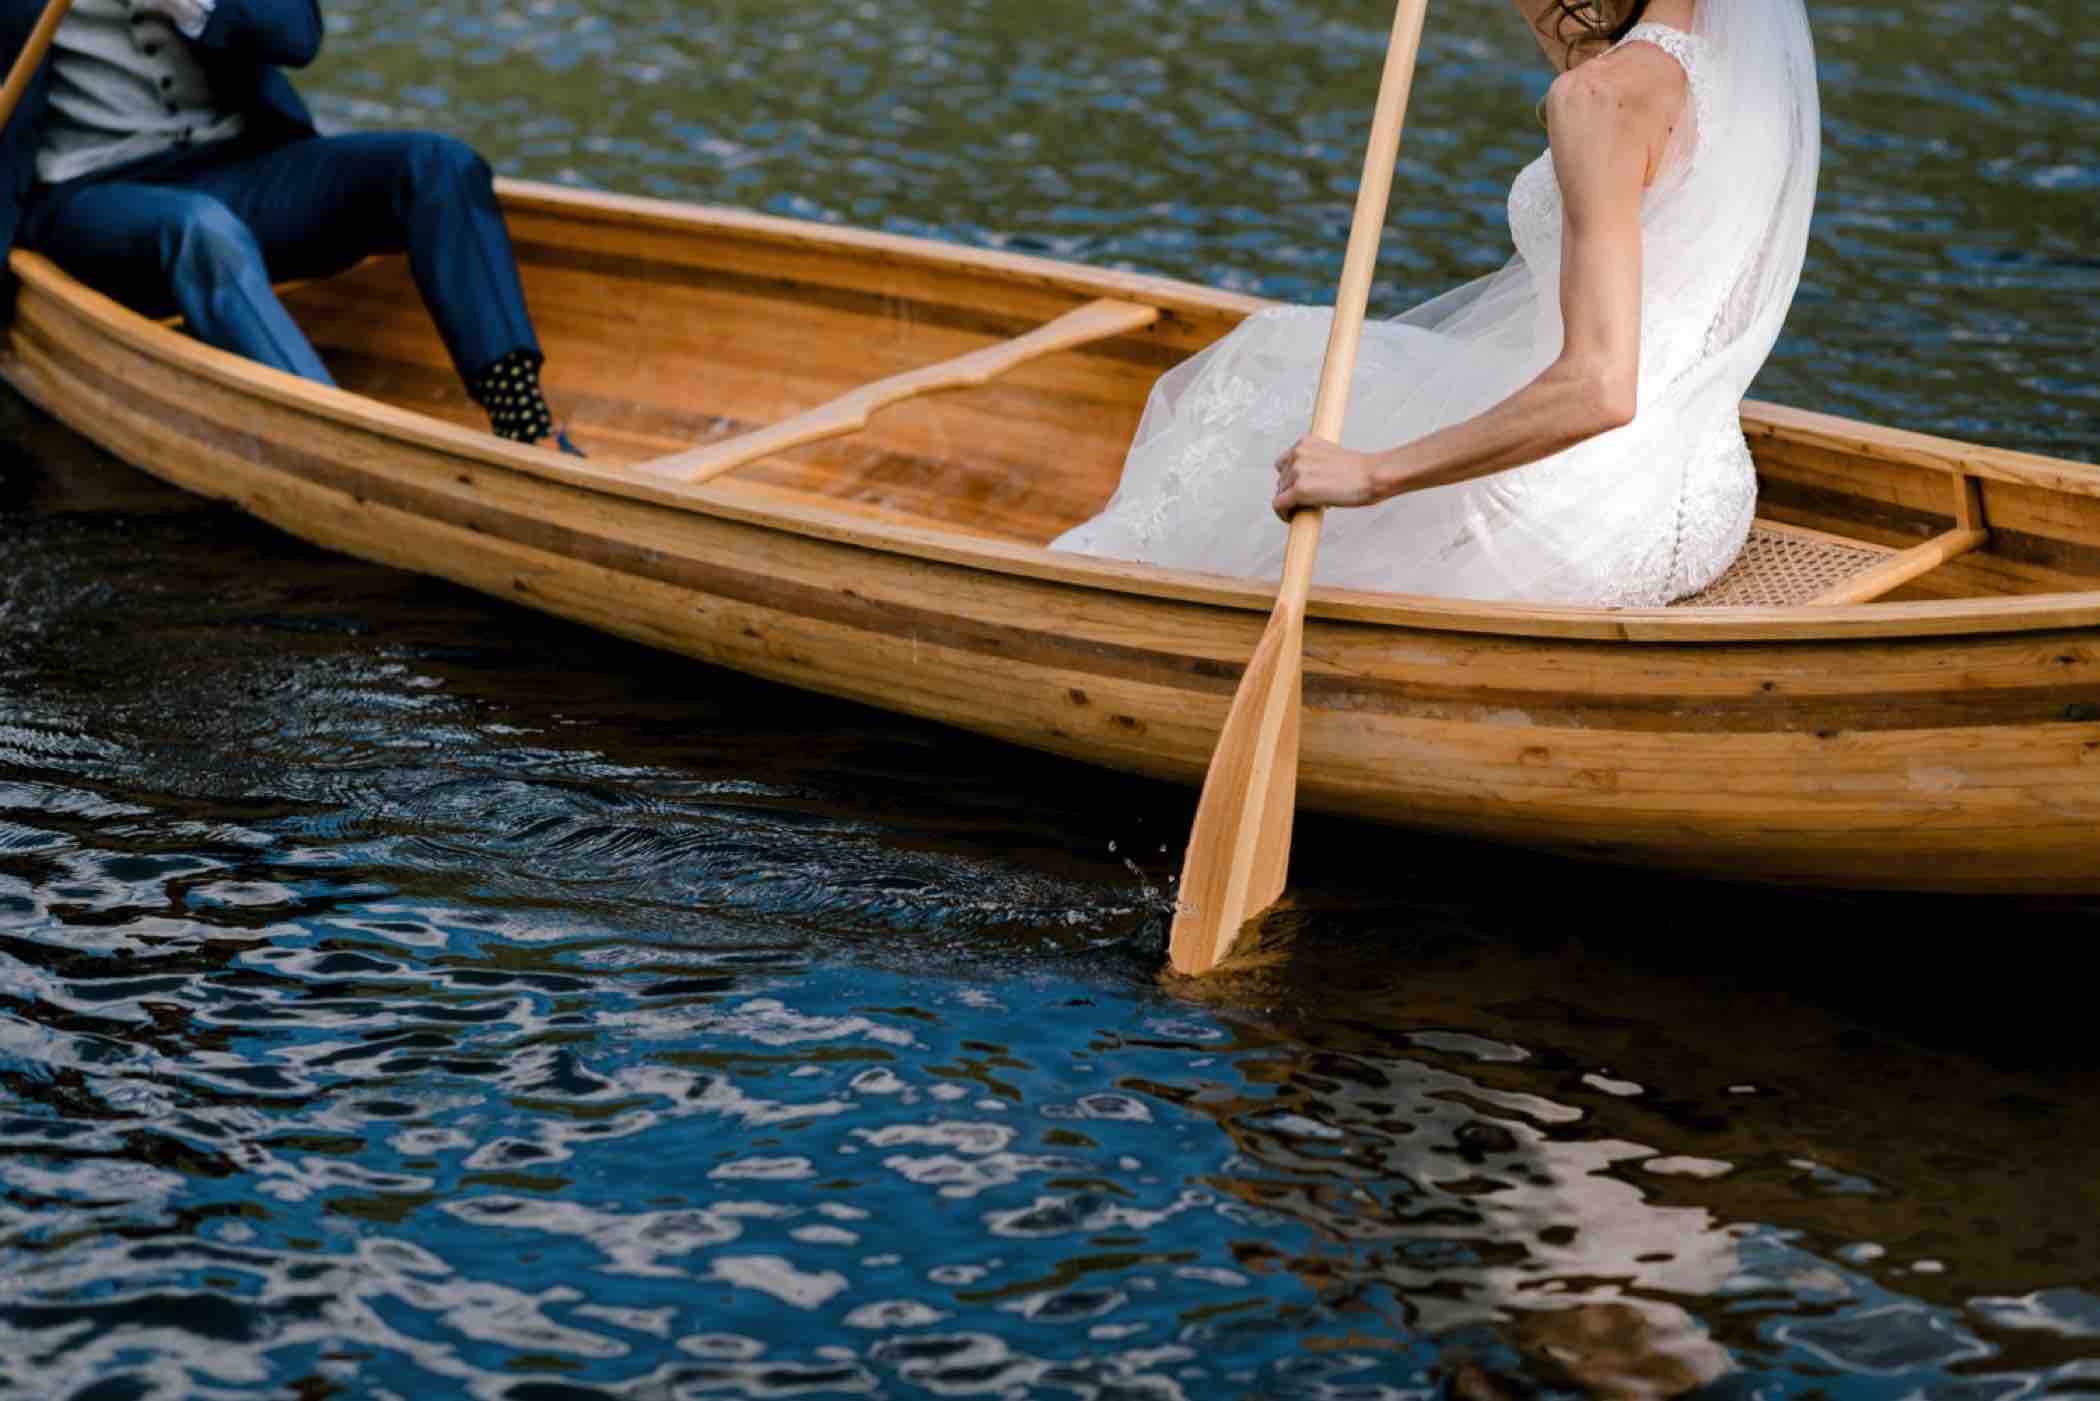 Bride and groom photos in a canoe after their wedding ceremony at Piney River Ranch. Photo by Ali and Garrett, Romantic, Adventurous, Nostalgic Wedding Photographers.